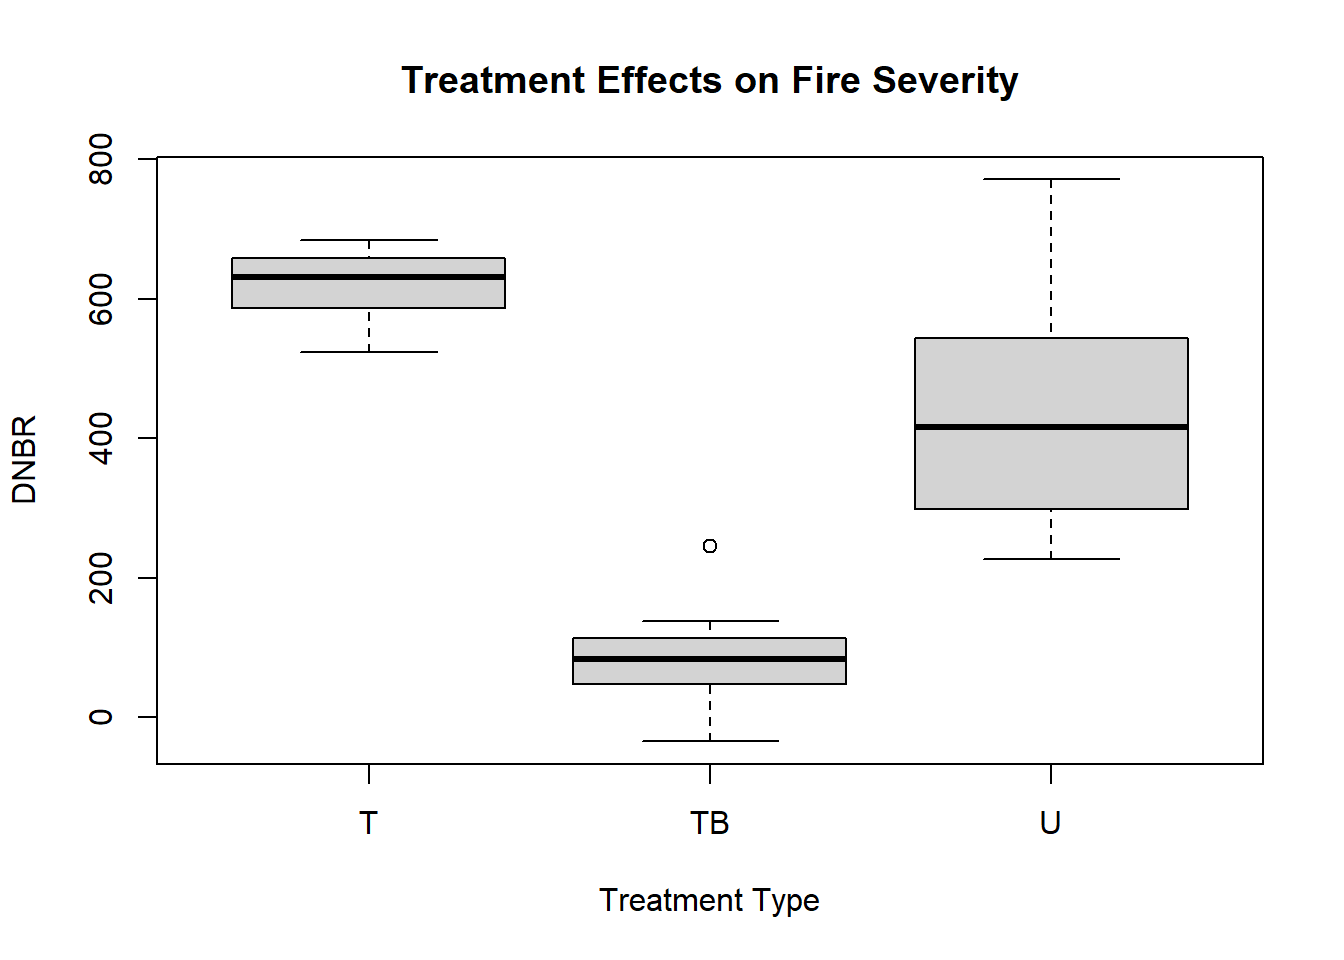 Boxplot showing the distribution of the DNBR fire severity index.